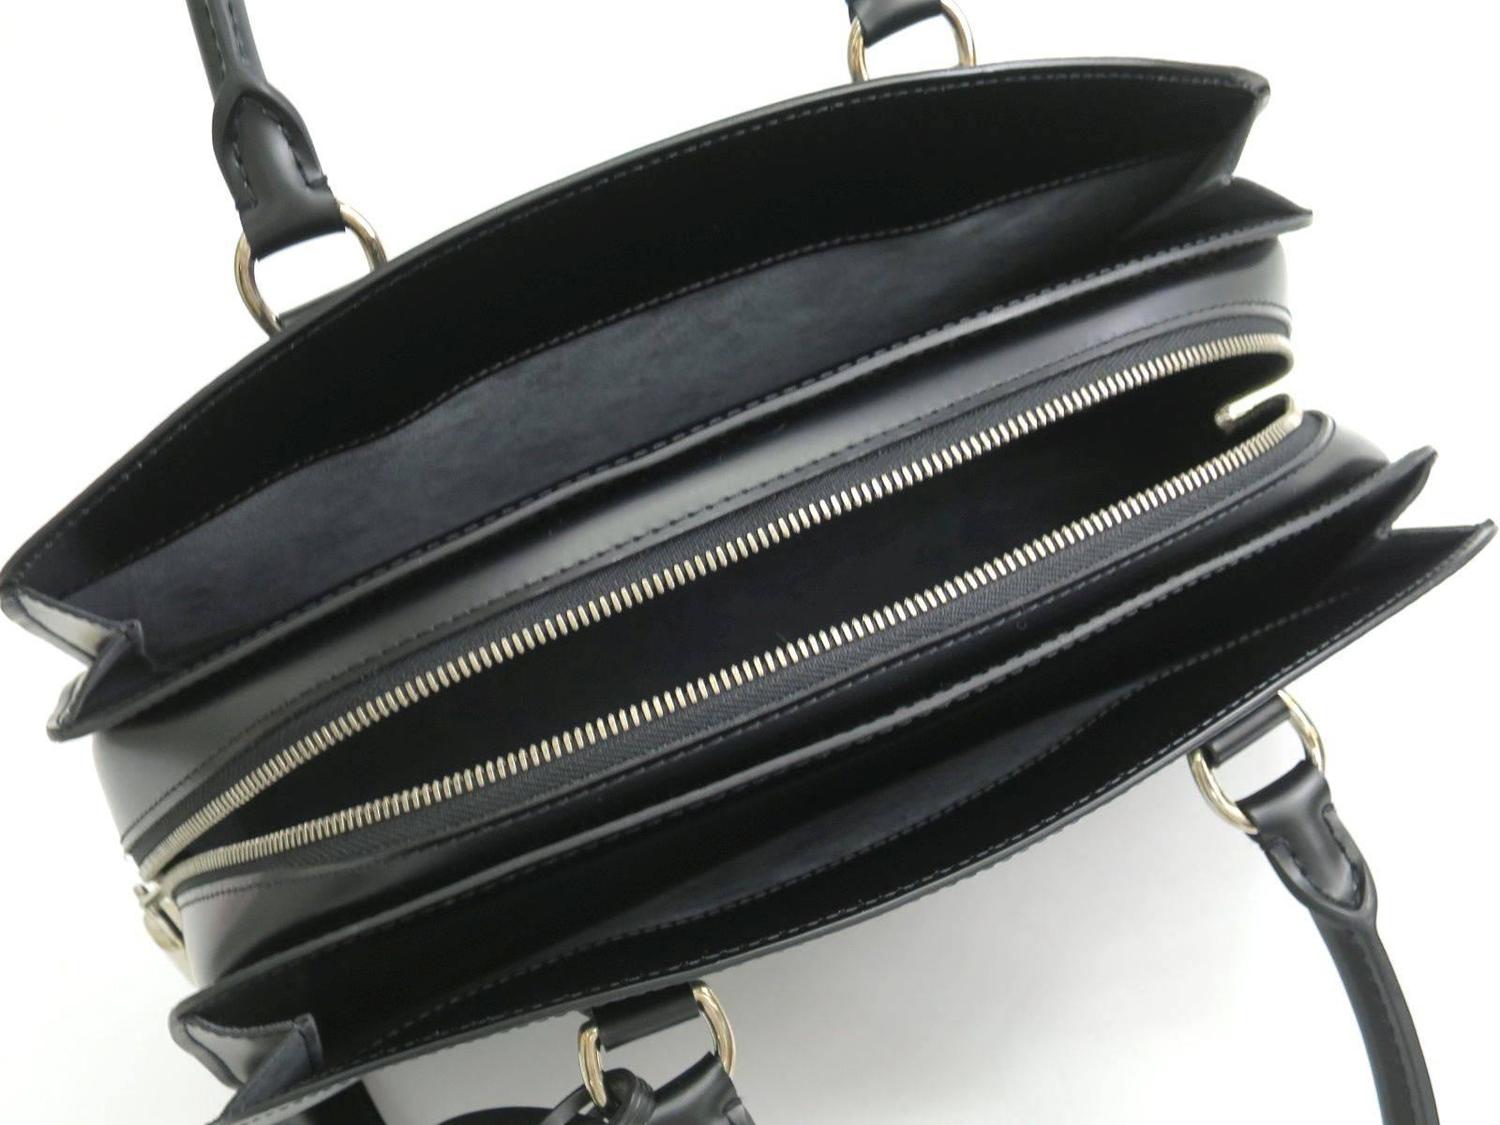 Louis Vuitton Black Leather Silver Hardware Top Handle Boston Satchel Bag For Sale at 1stdibs